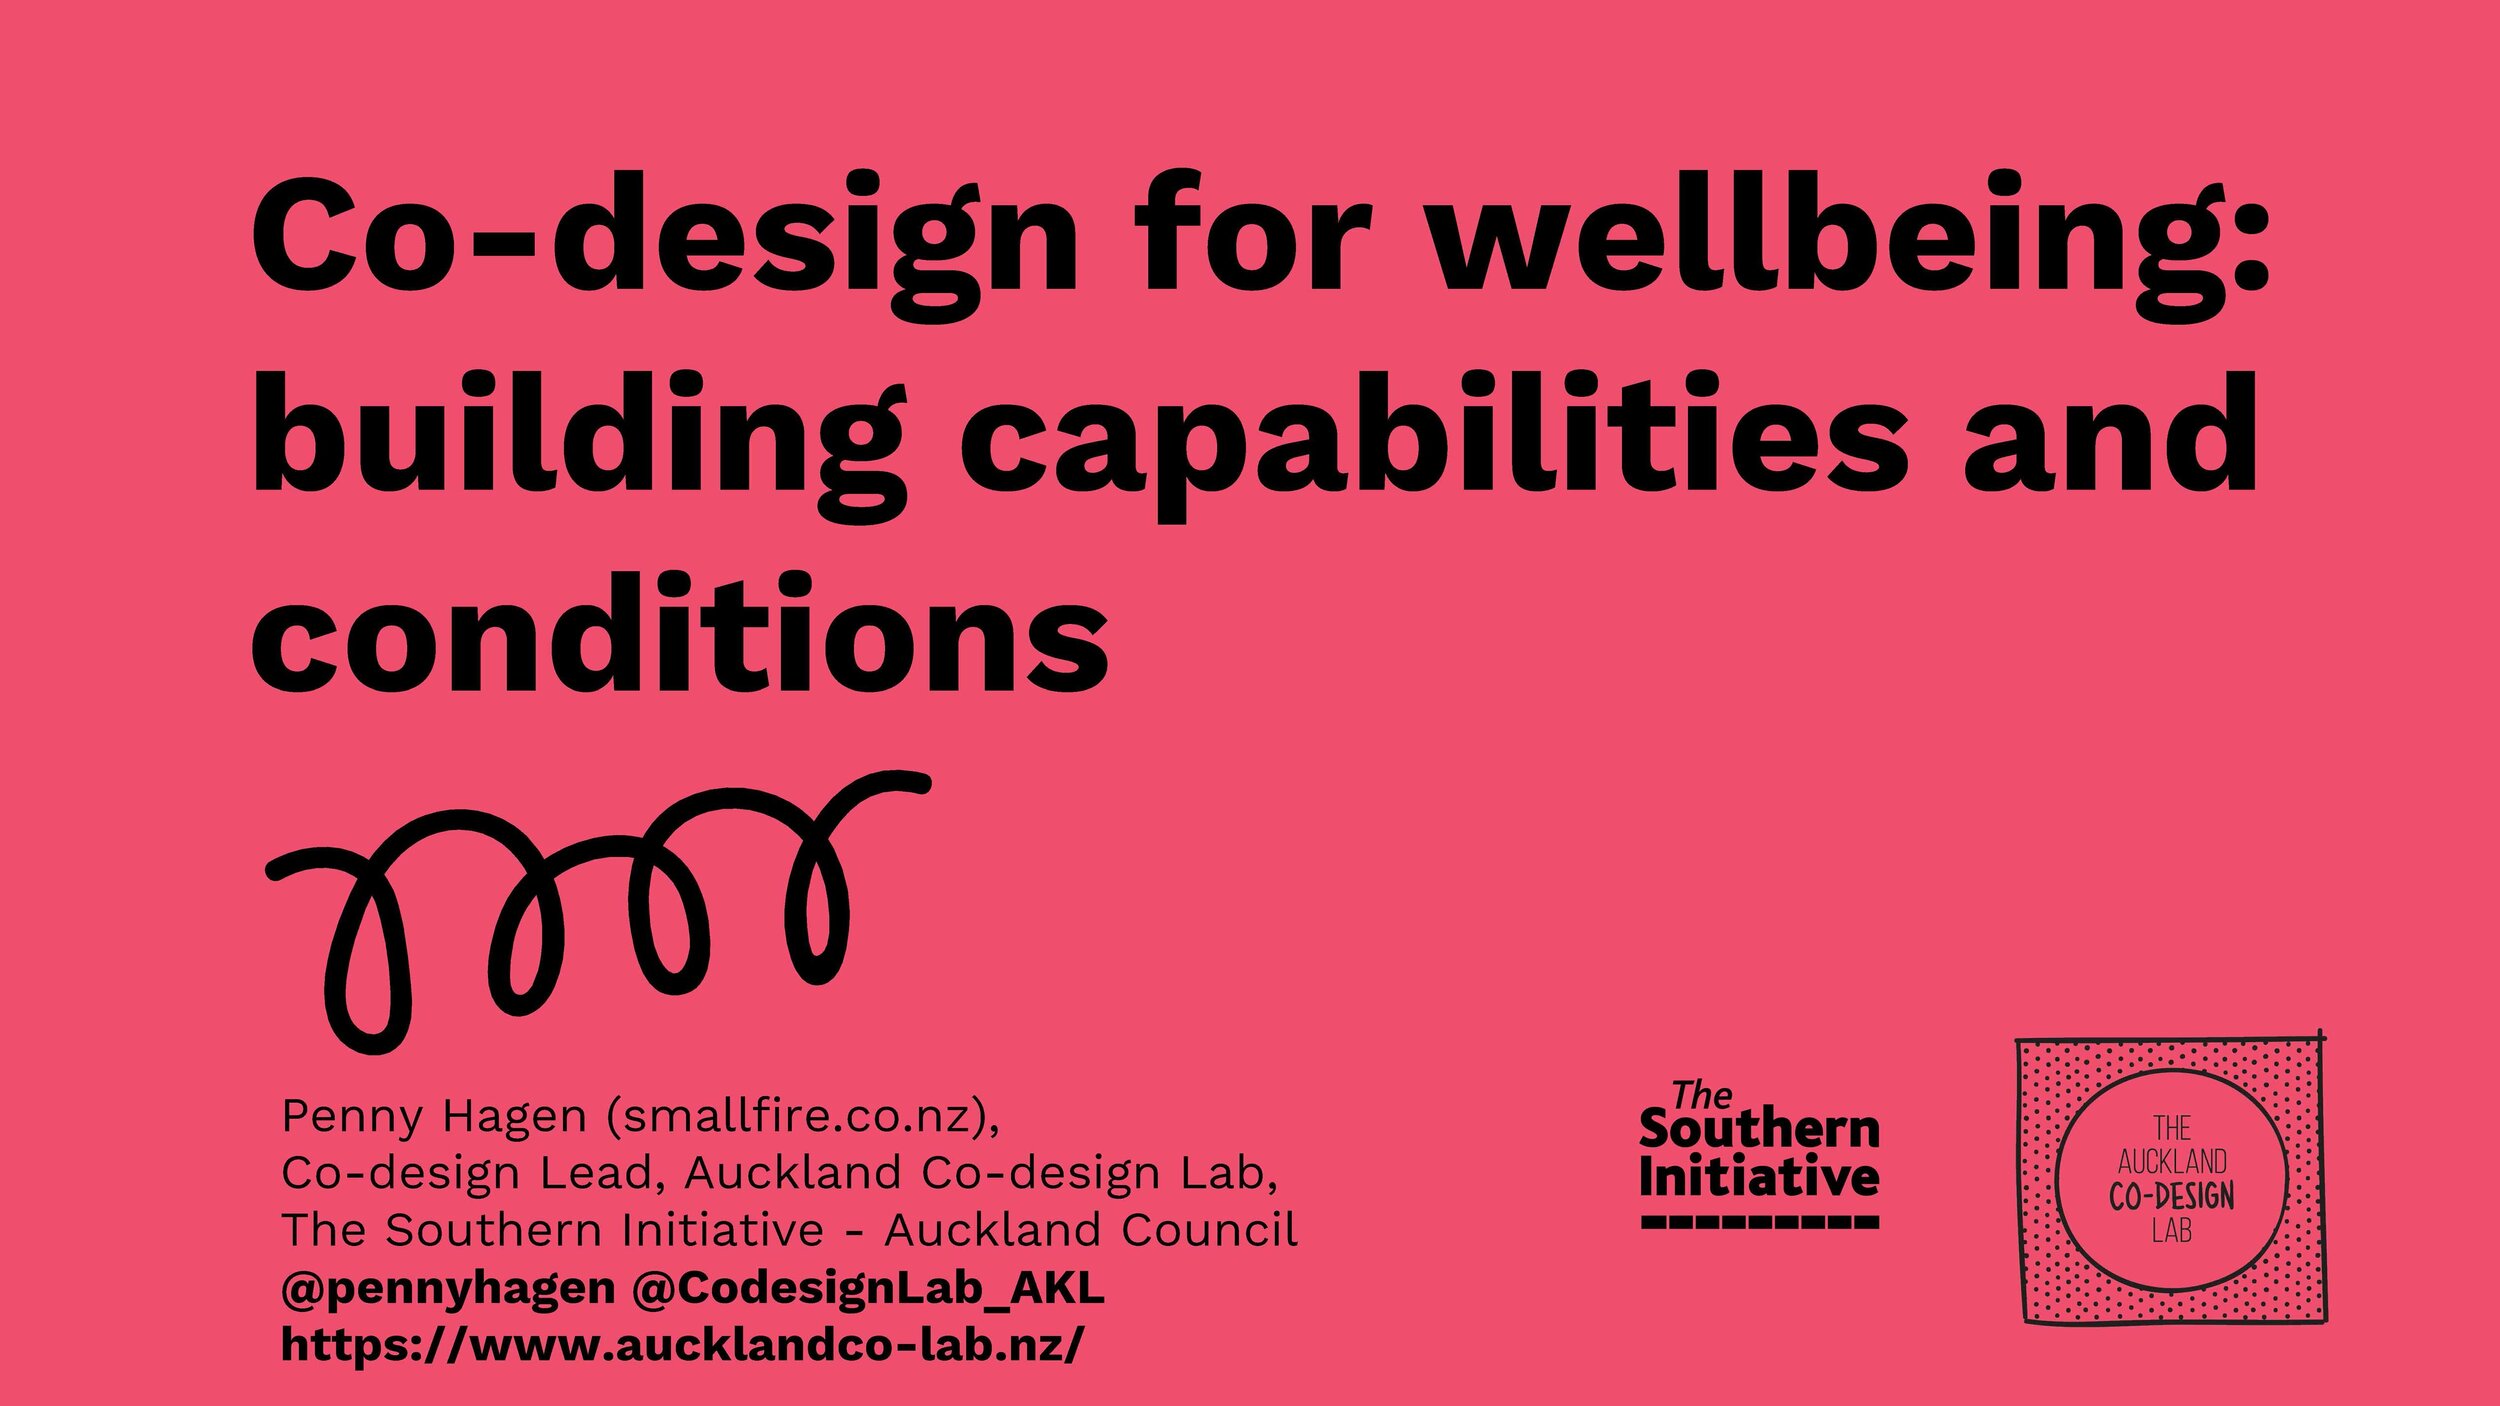 Co-design+for+well+being_+capabilities+and+conditions+(2)_Page_01.jpg